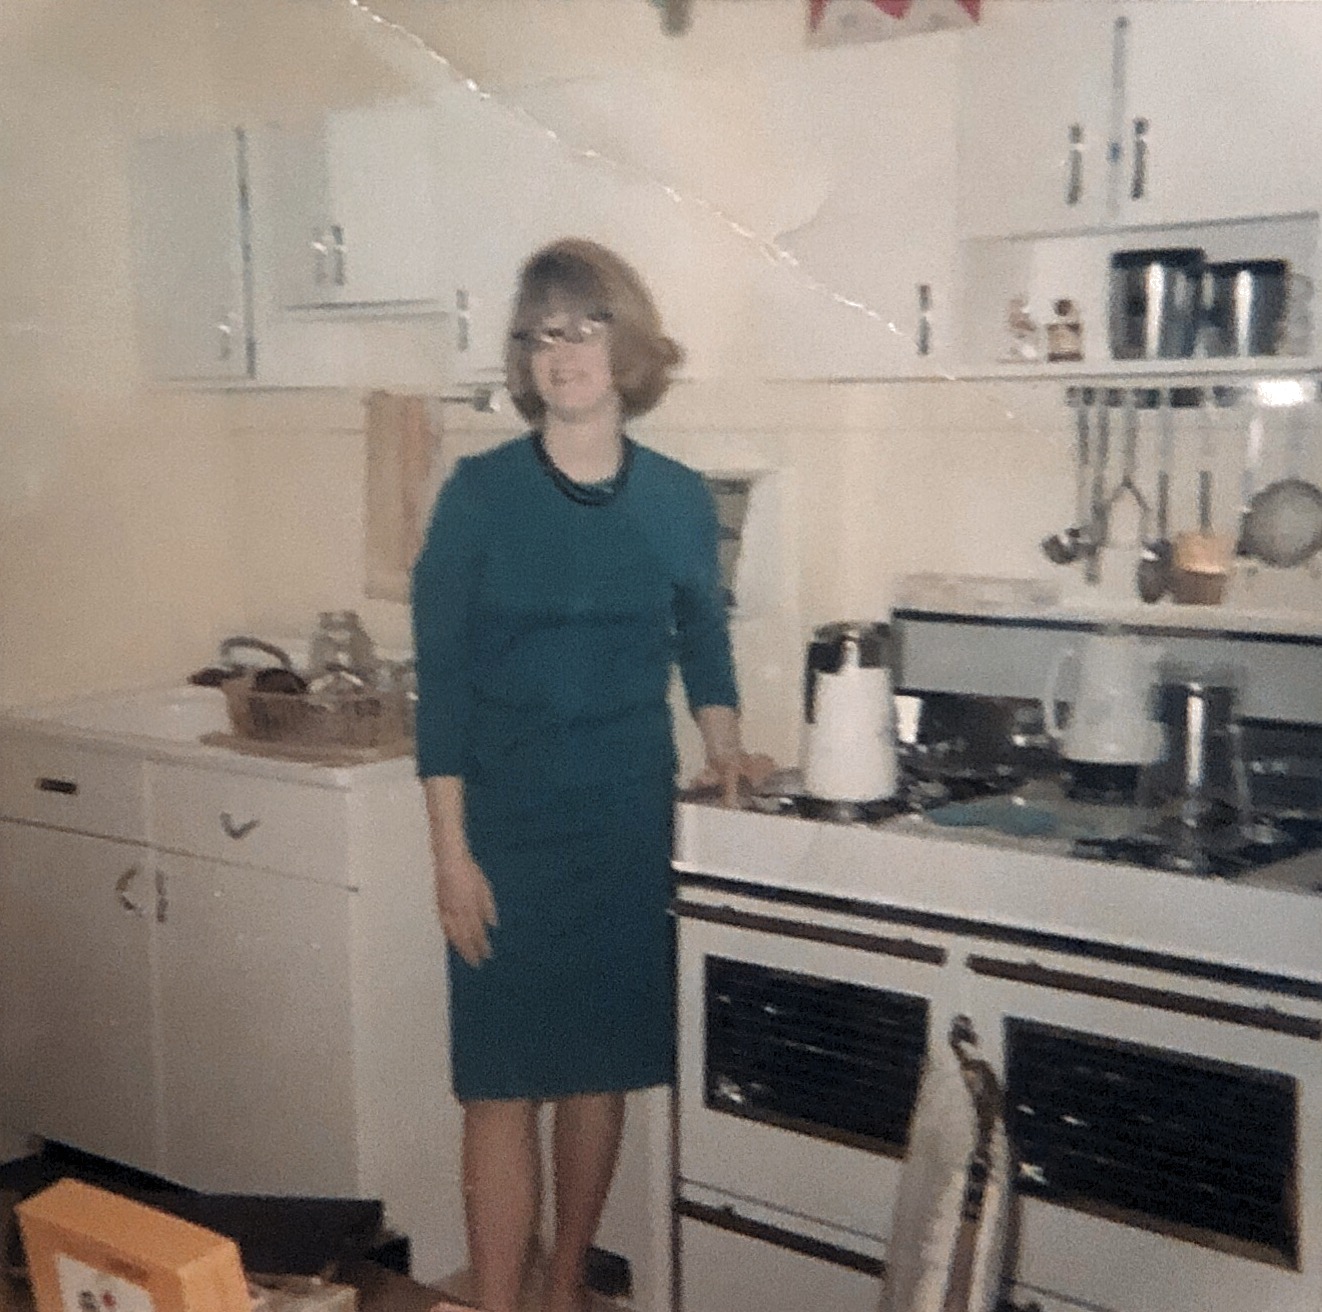 Our first kitchen. Home from honeymoon-1966 October